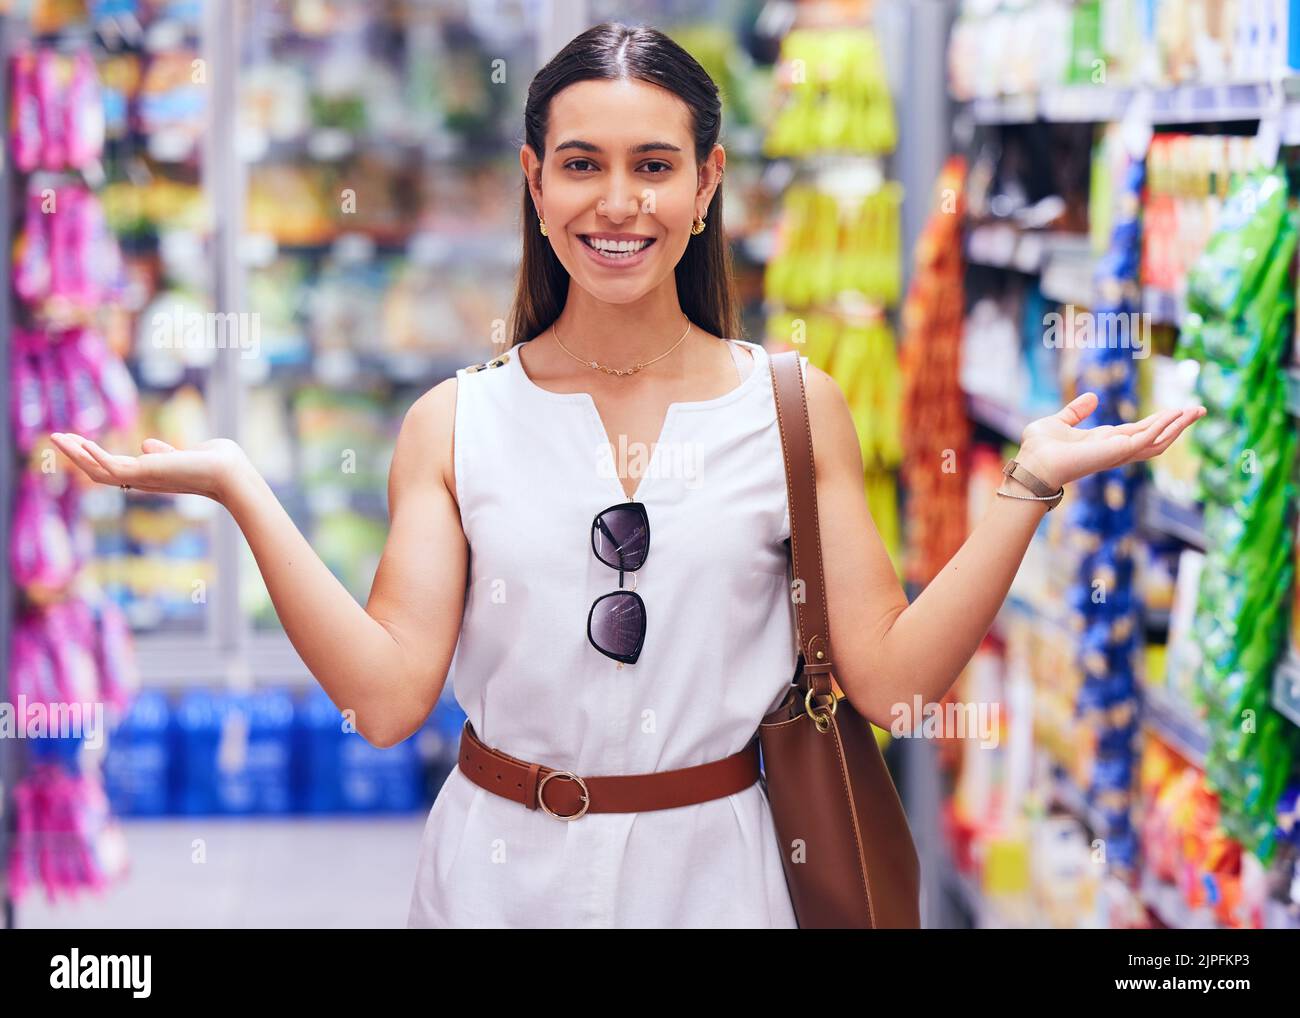 Shopping, retail and consumerism with a female customer standing in a grocery store, shop or supermarket aisle. Portrait of a young woman gesturing Stock Photo